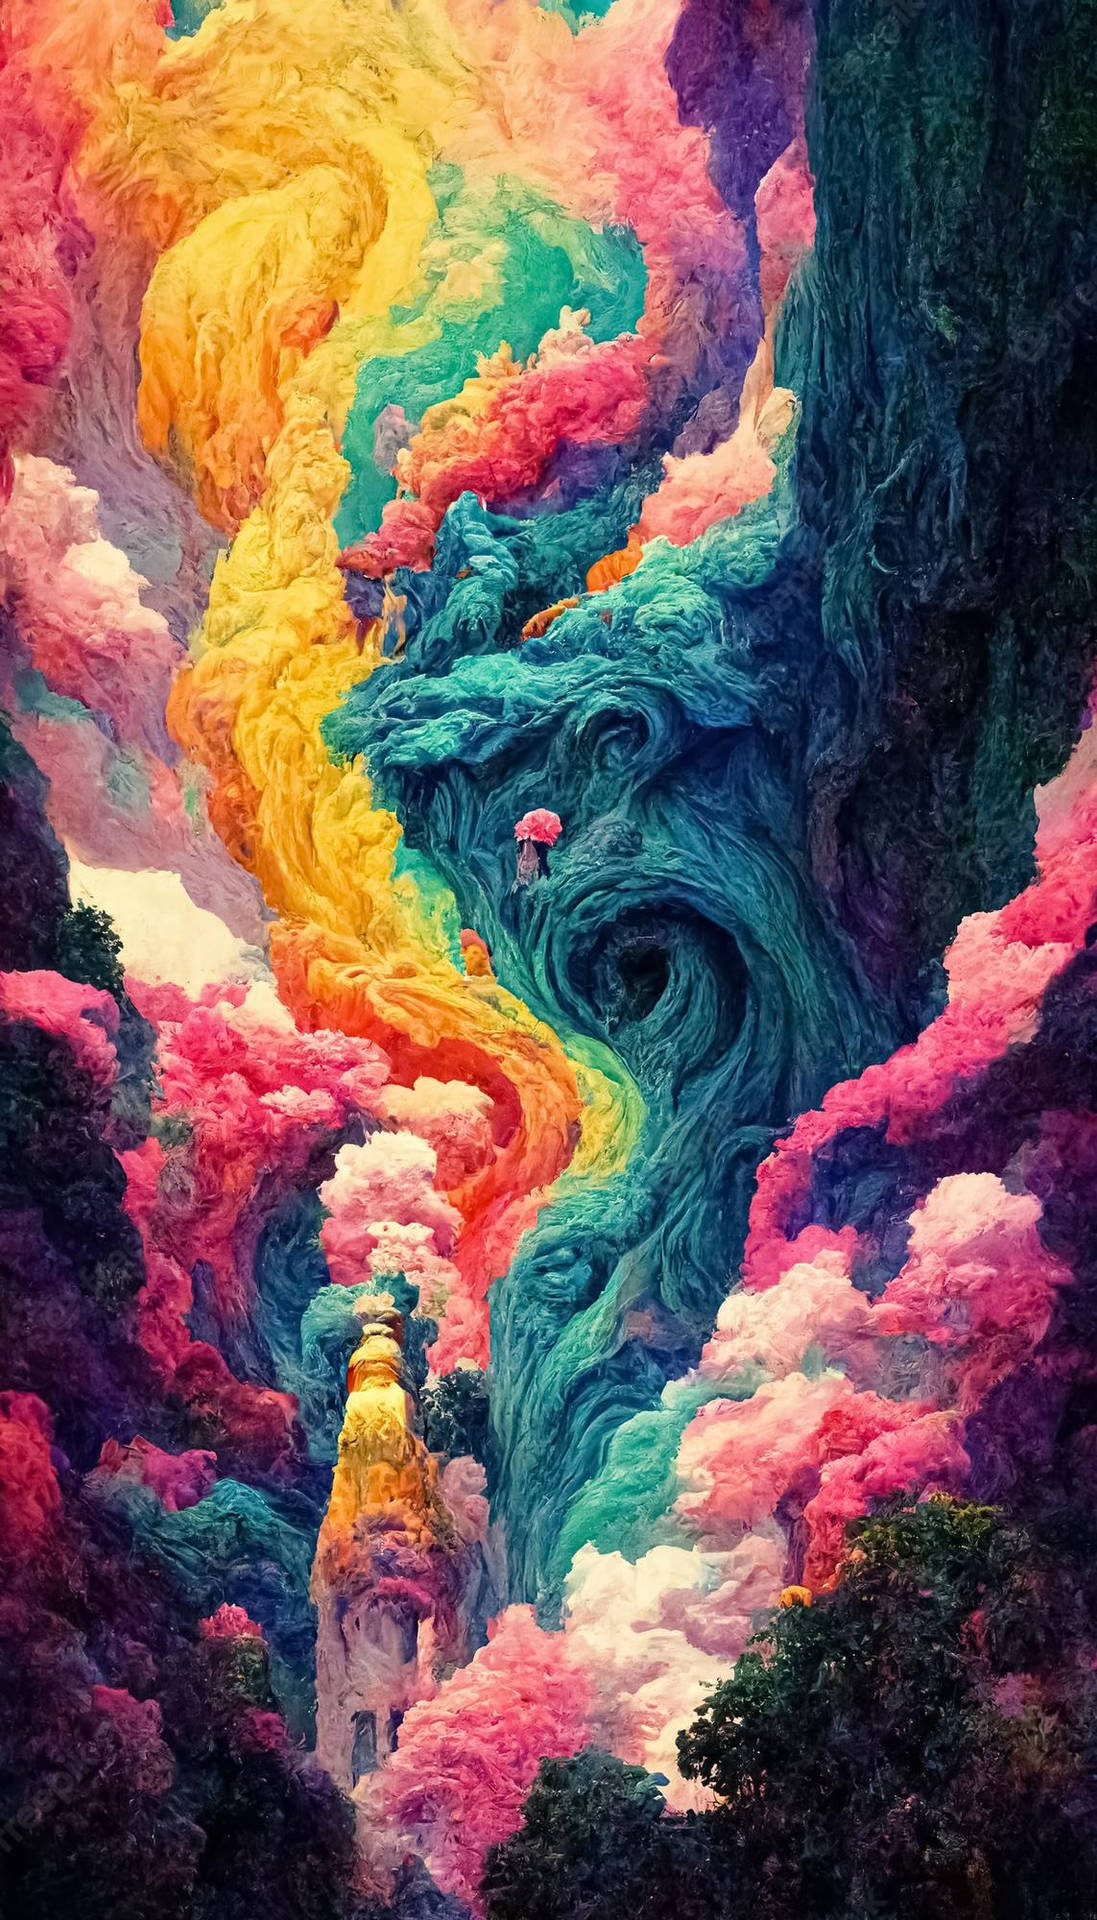 Tower And Psychedelic Cloud Wallpaper